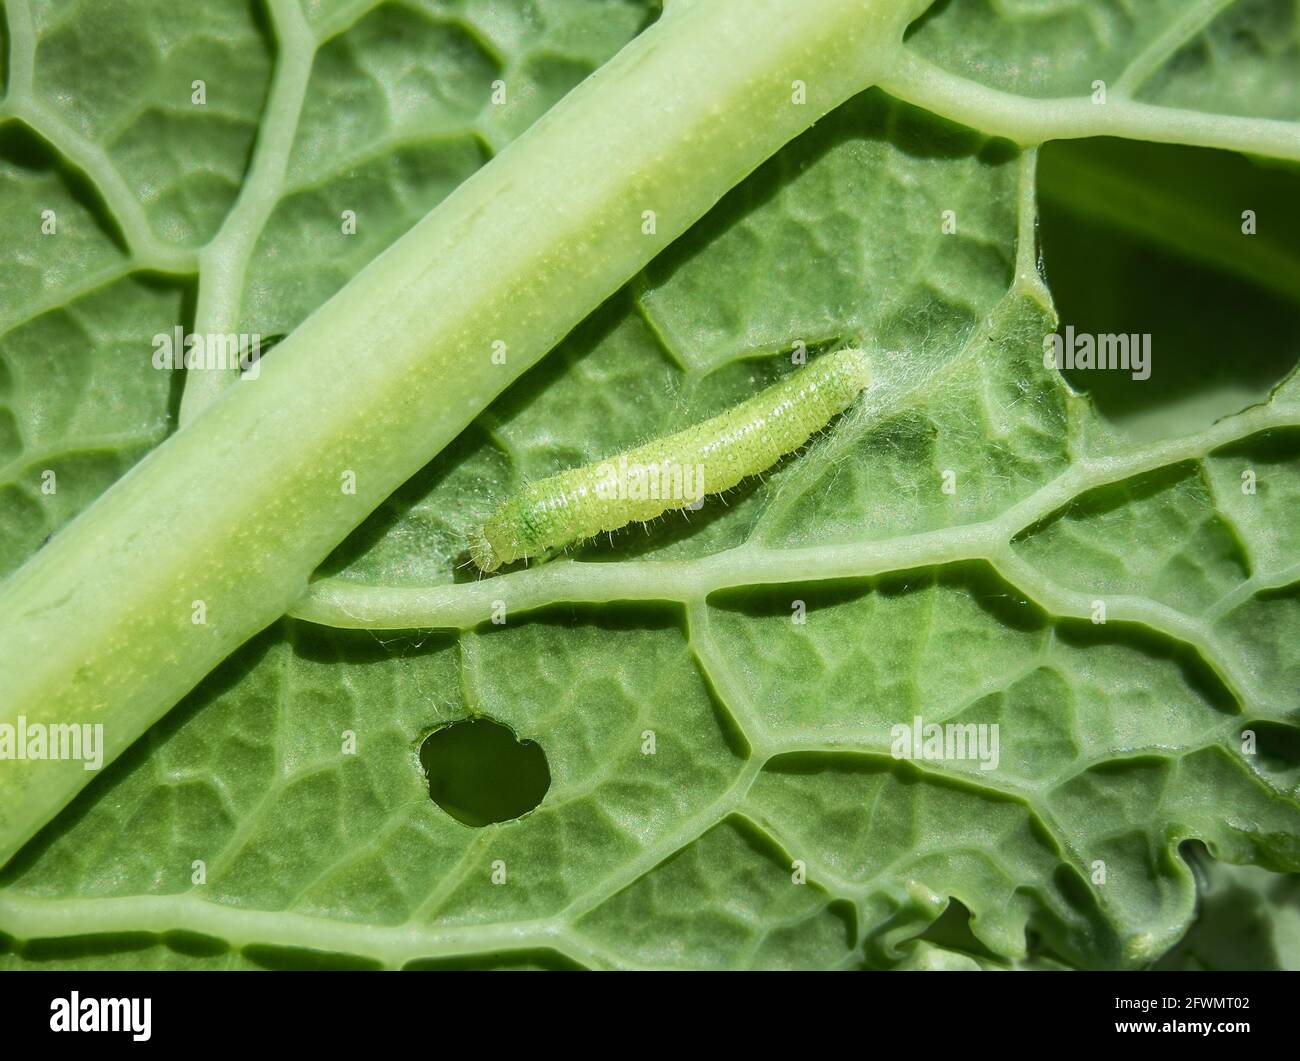 Larva of cabbage white butterfly, cabbage butterfly or Pieris rapae. Macro of tiny 1-5 days old yellow green caterpillar or larva feeding on a kale le Stock Photo